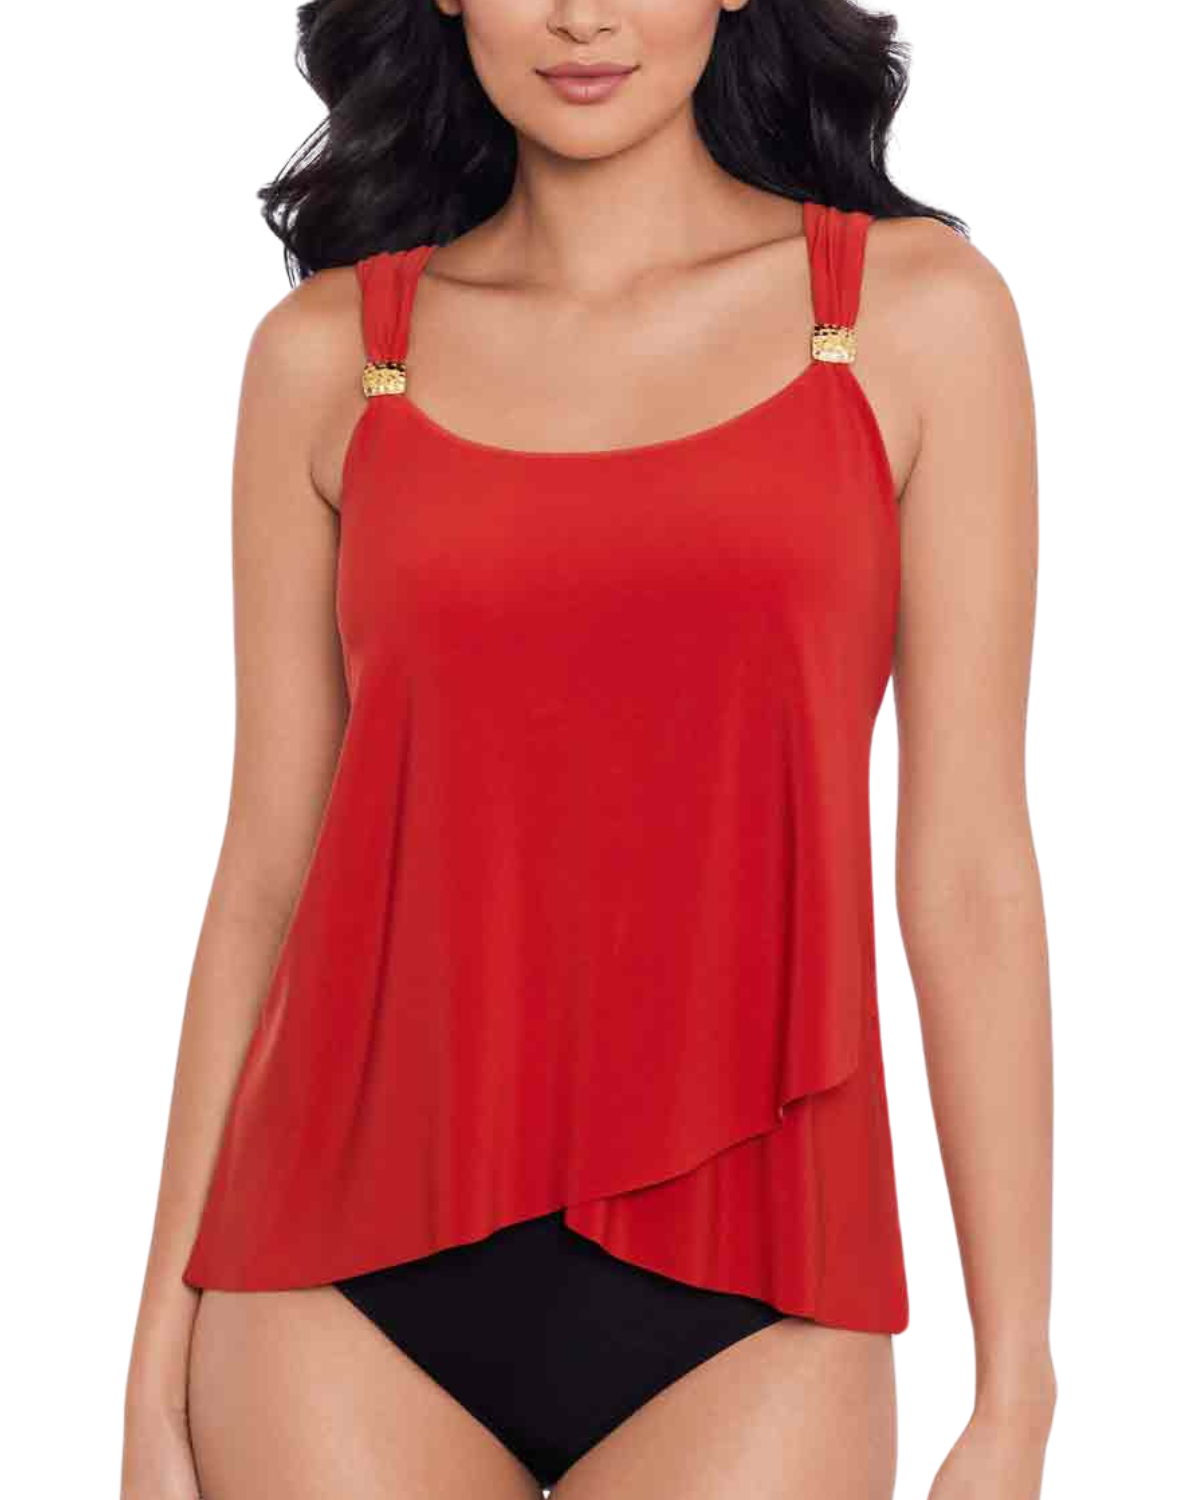 2024 Miraclesuit Solids Dazzle Tankini Top - 6516626